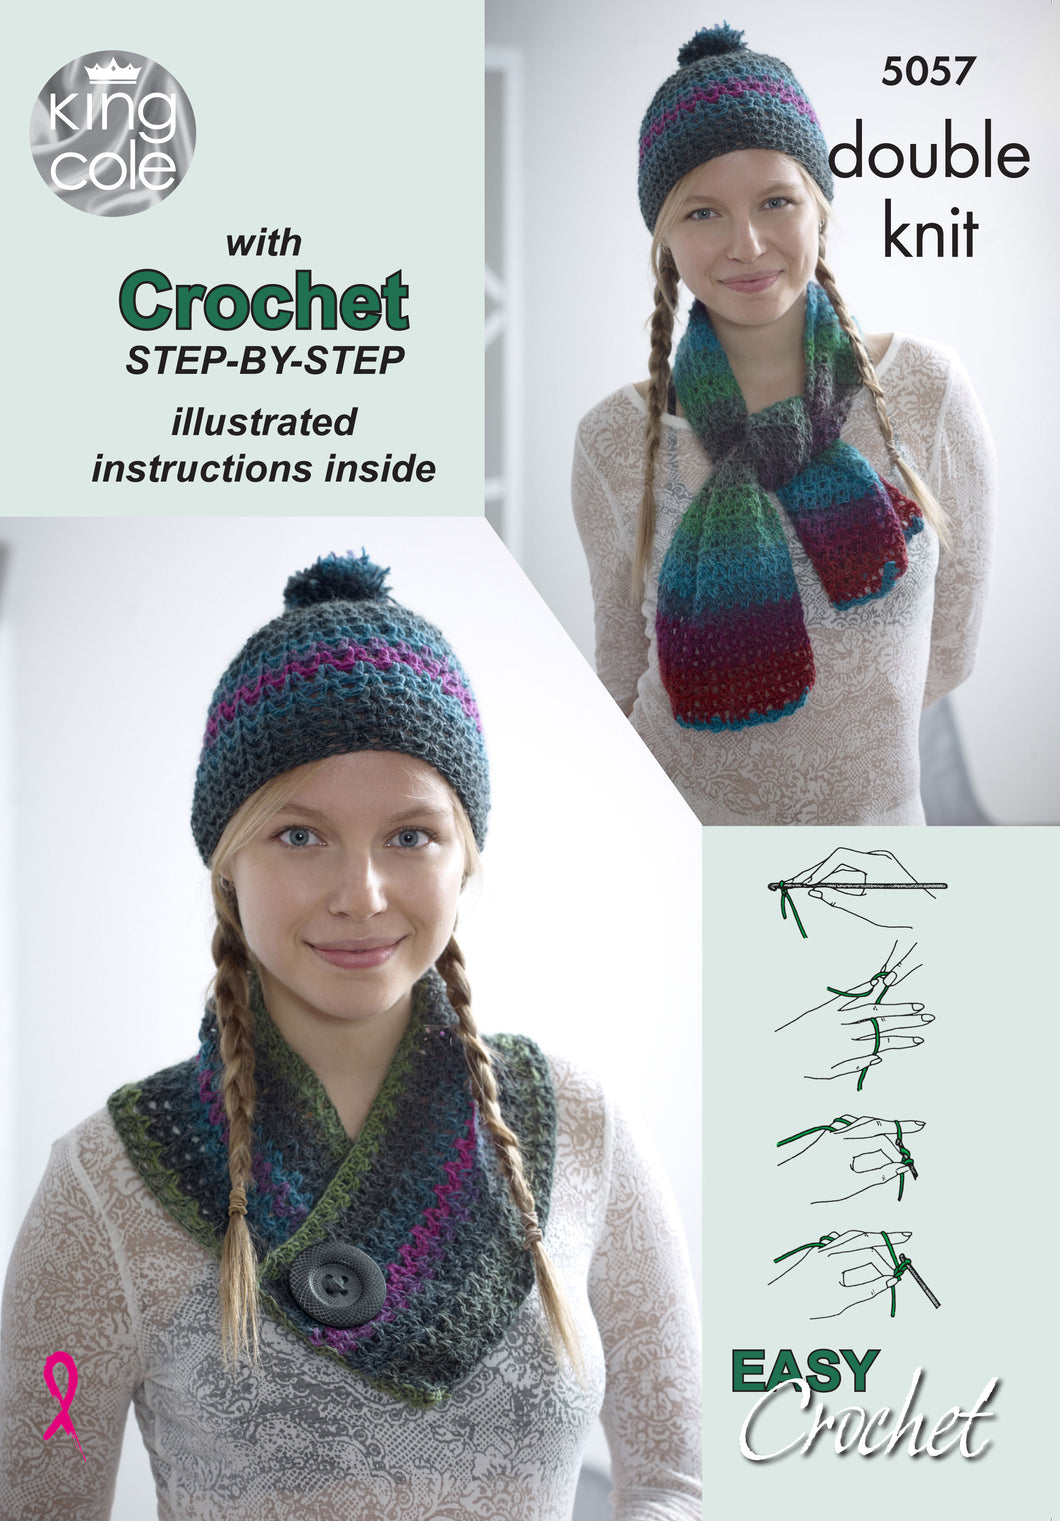 King Cole Pattern 5057: Crochet Scarf, Hat & Cowl set with Step by Step instructions